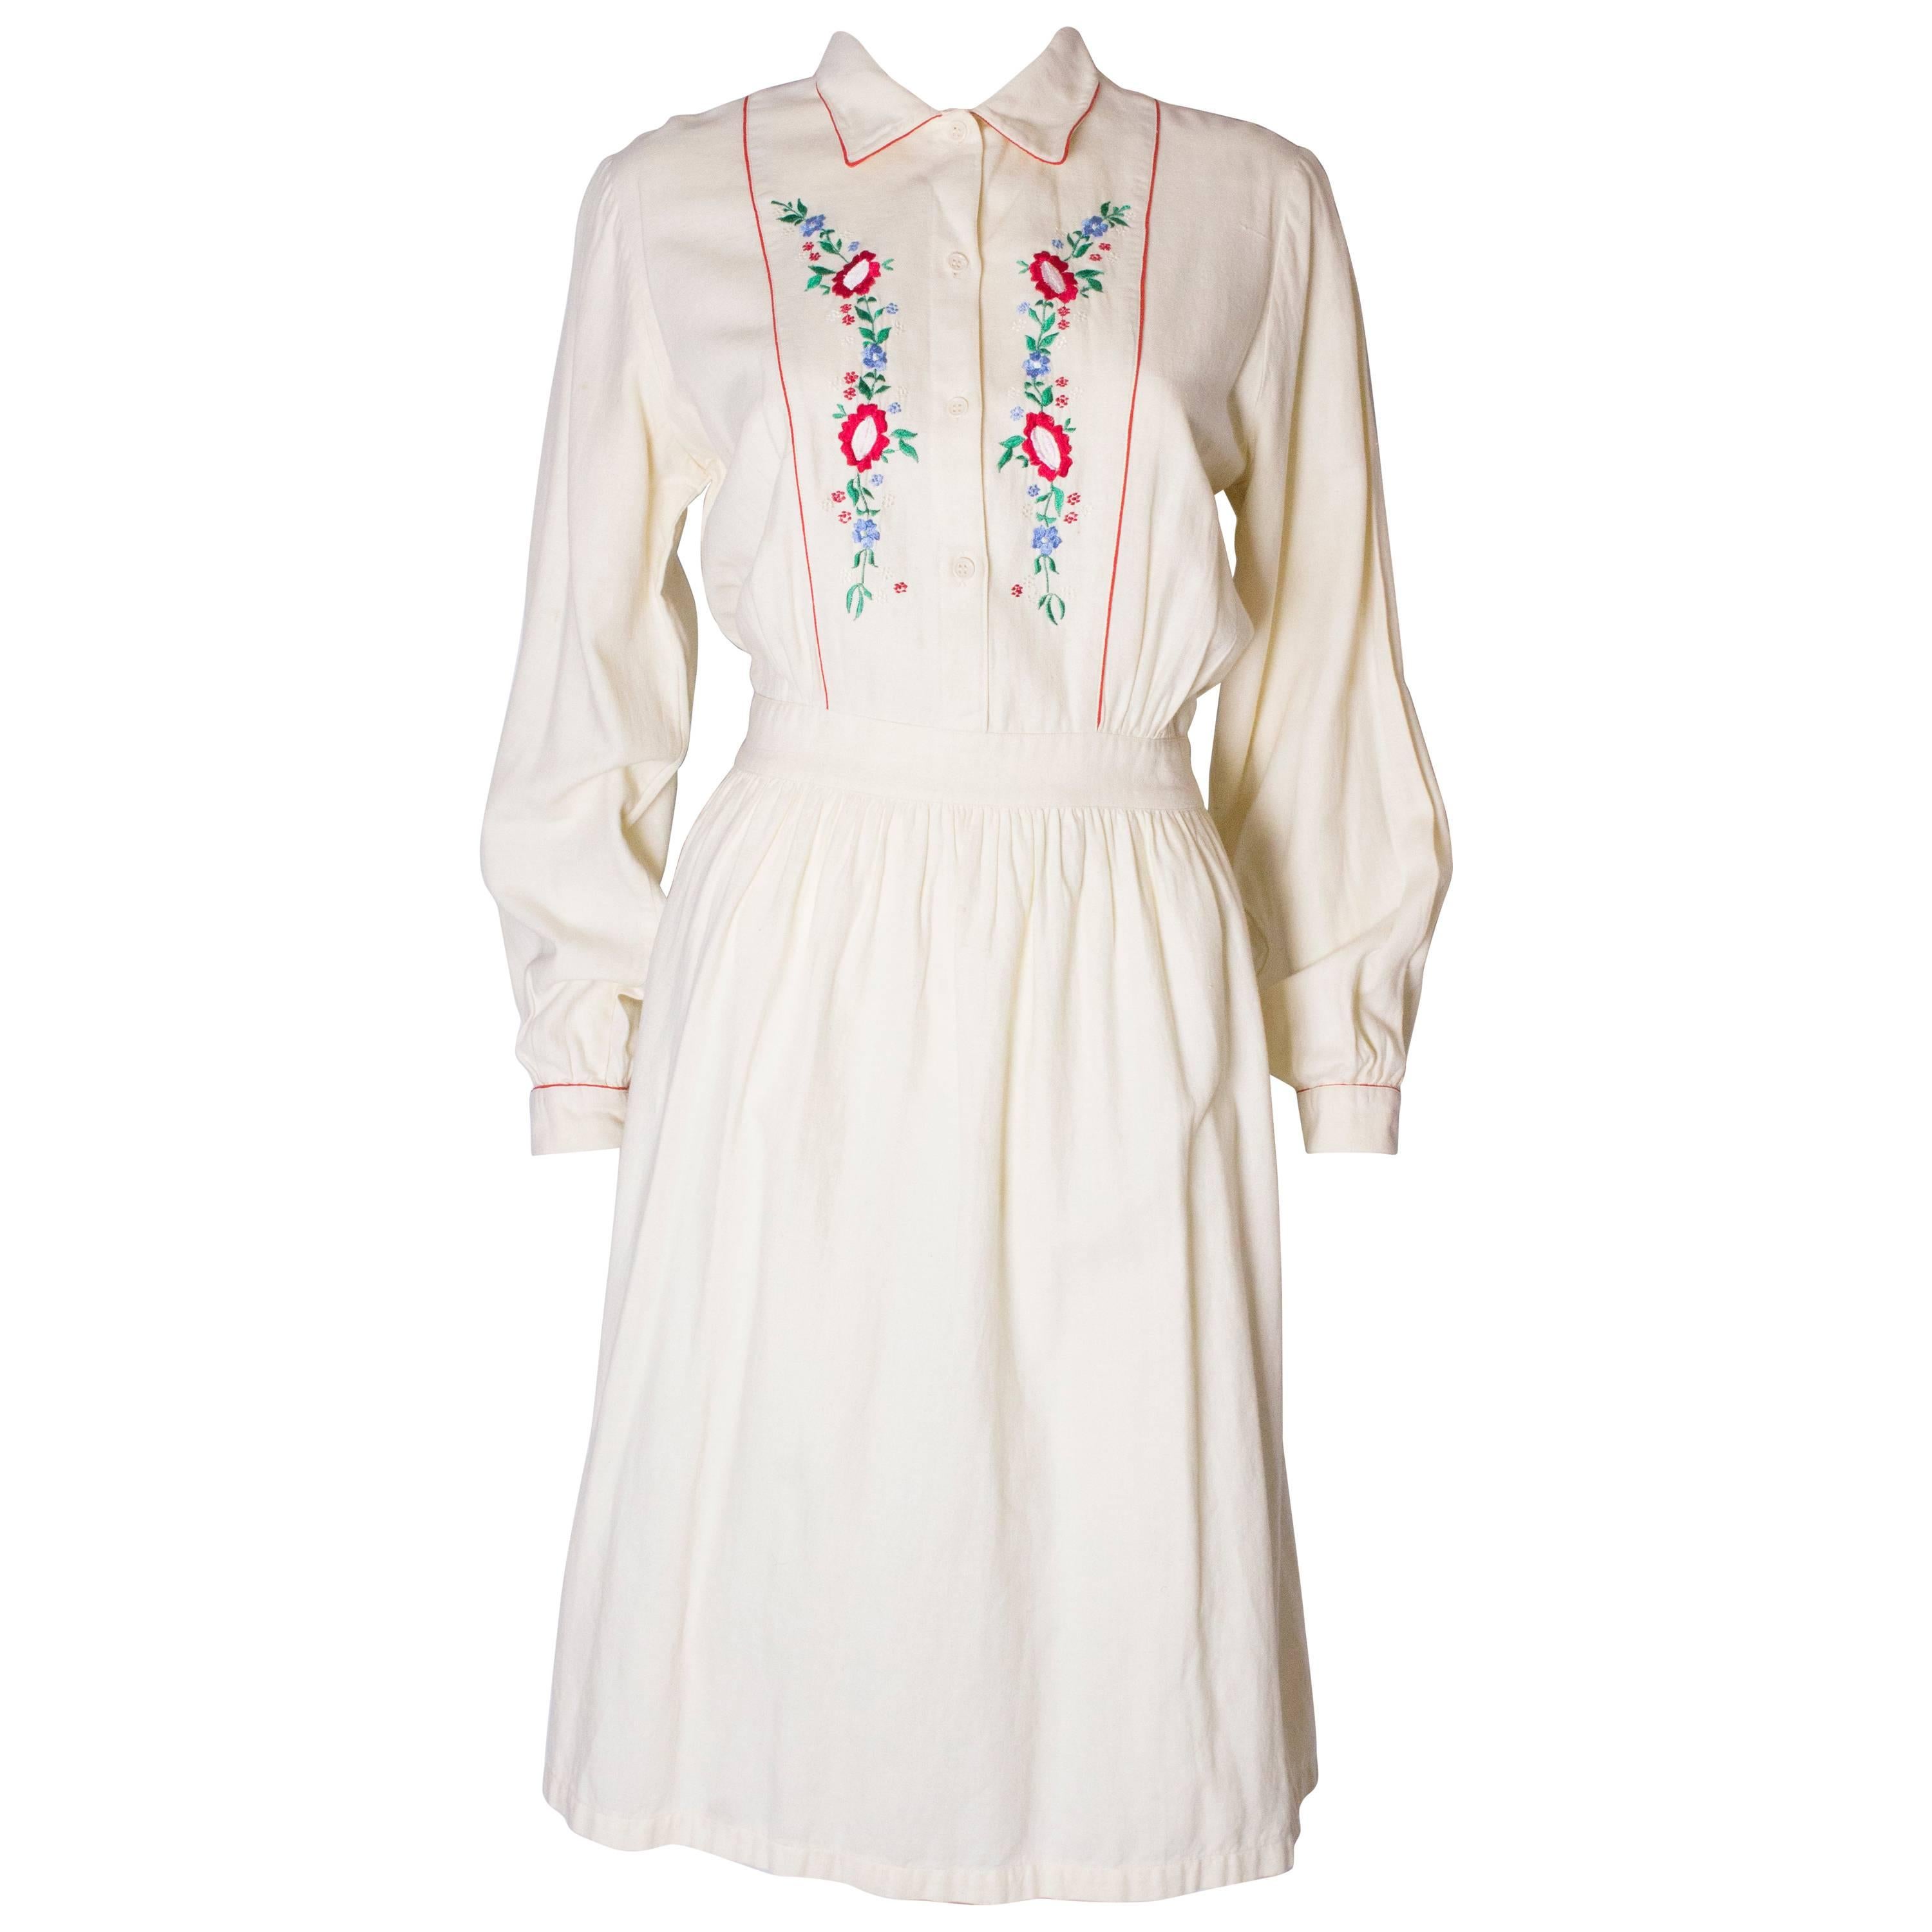 A Vintage 1970s floral embroidered cotton day dress by Miss Selfridge 